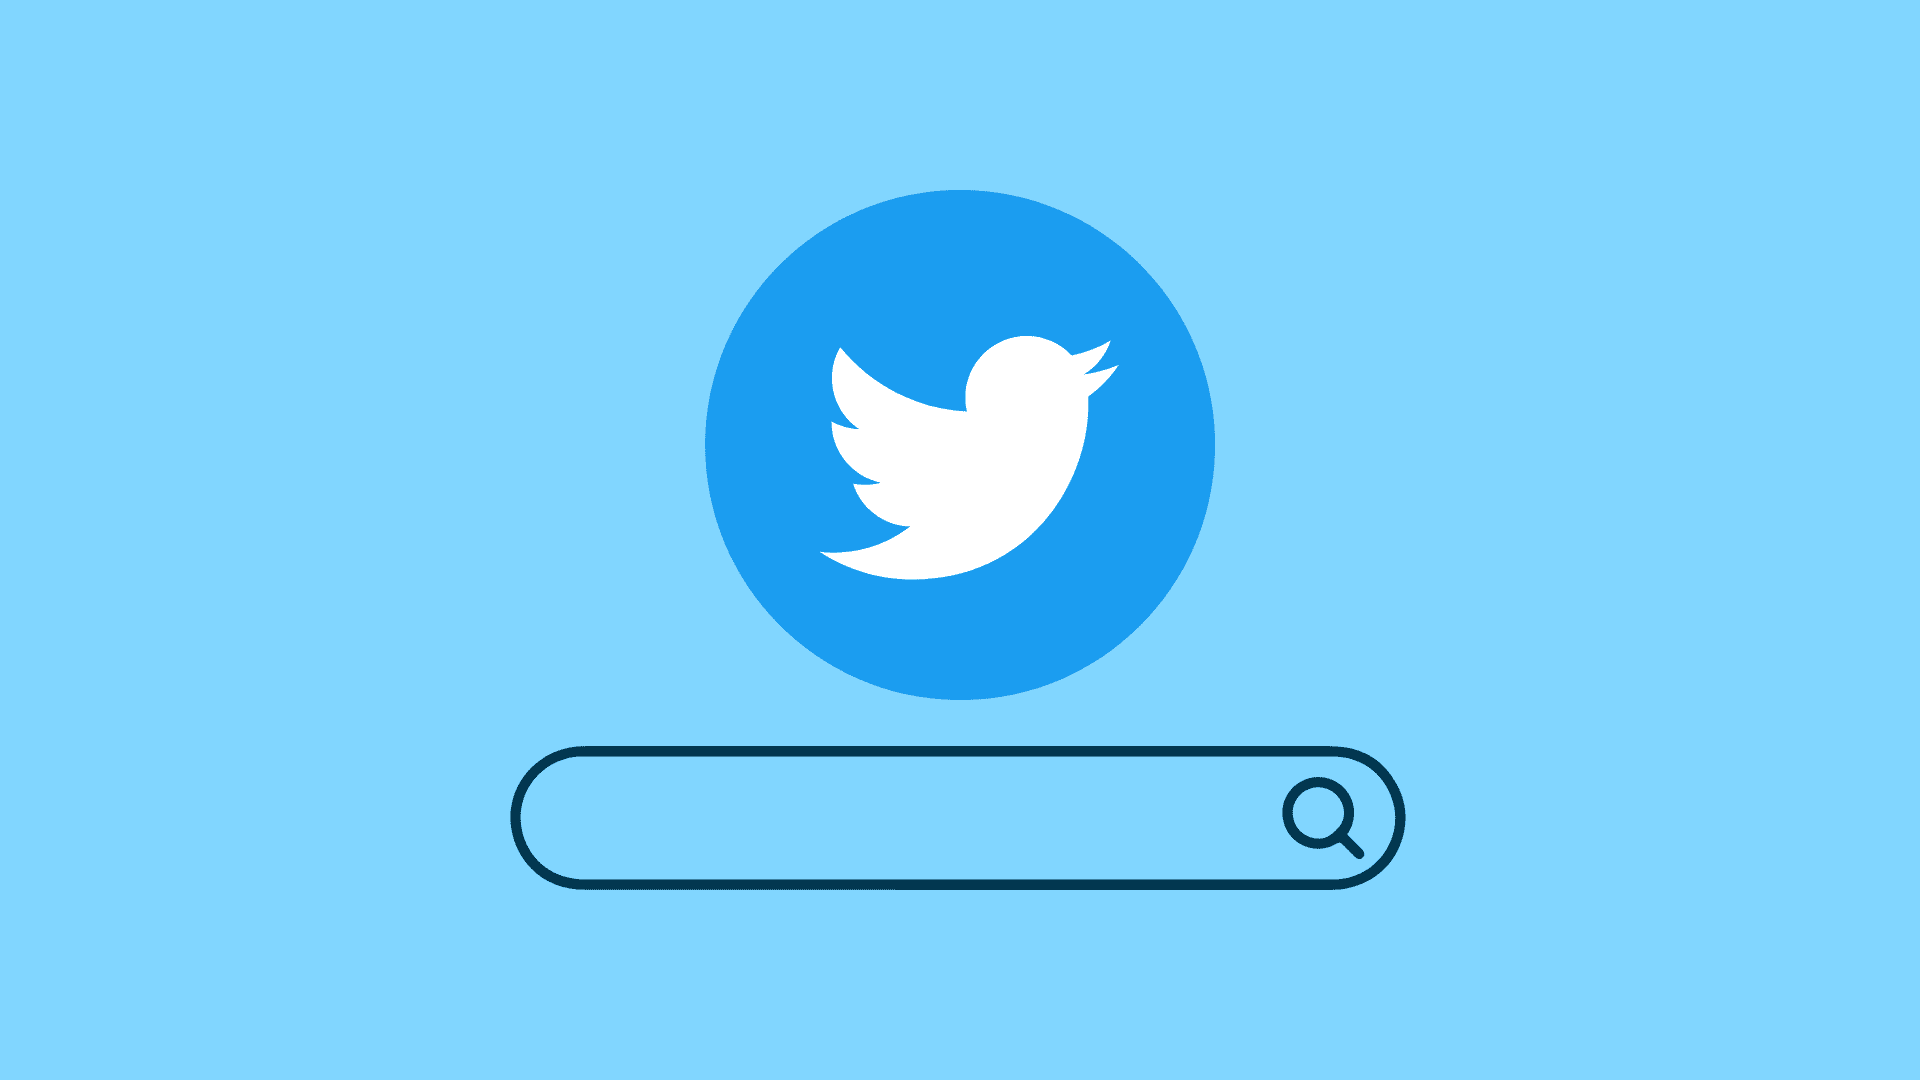 Twitter logo with a Search bar under it